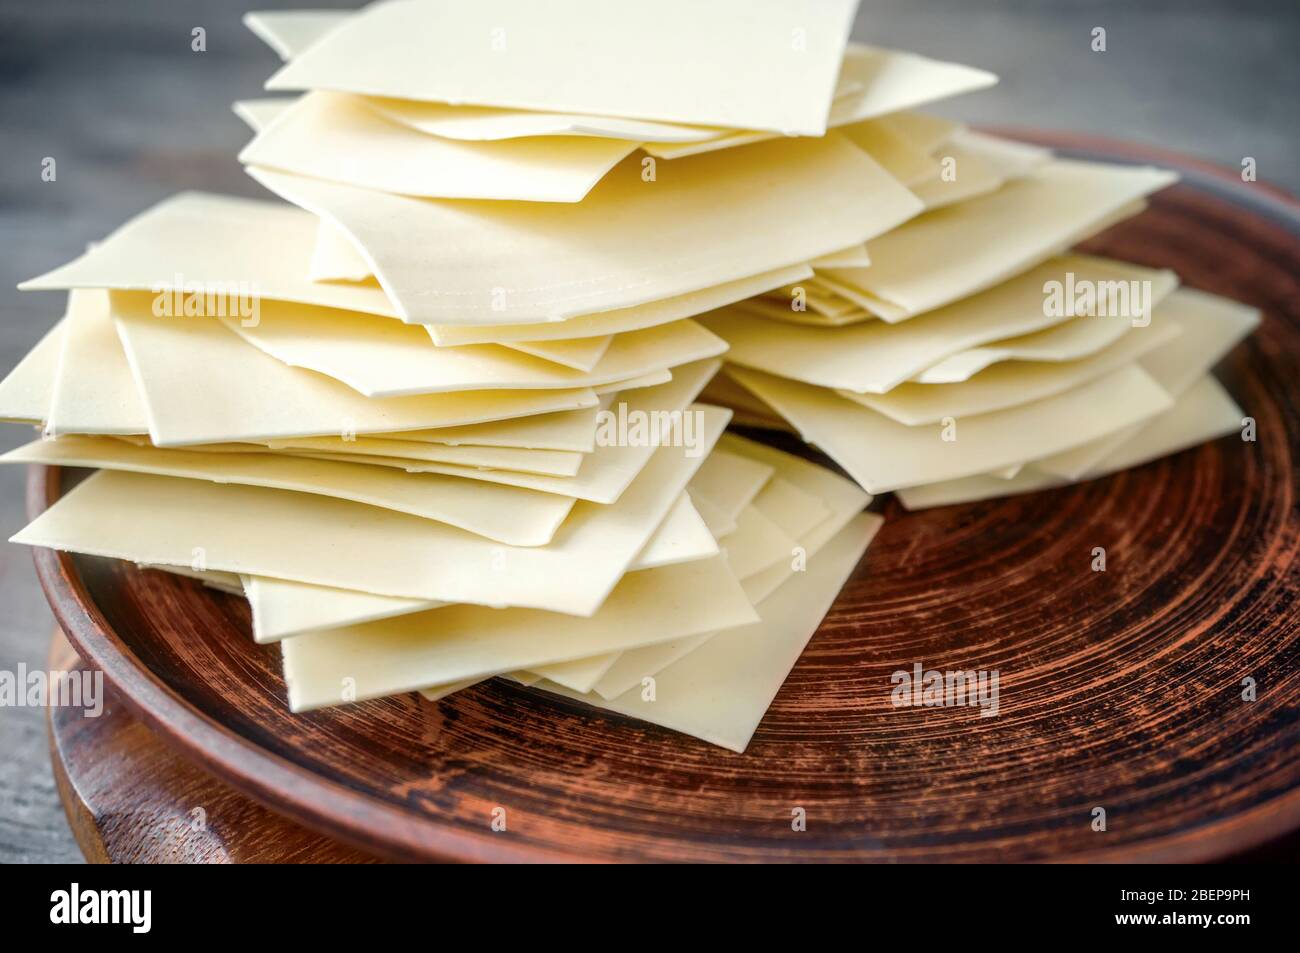 Ready-made dried dough squares for lasagna and beshbarmak. Sheets and thin layers of dough for national dishes. Stock Photo